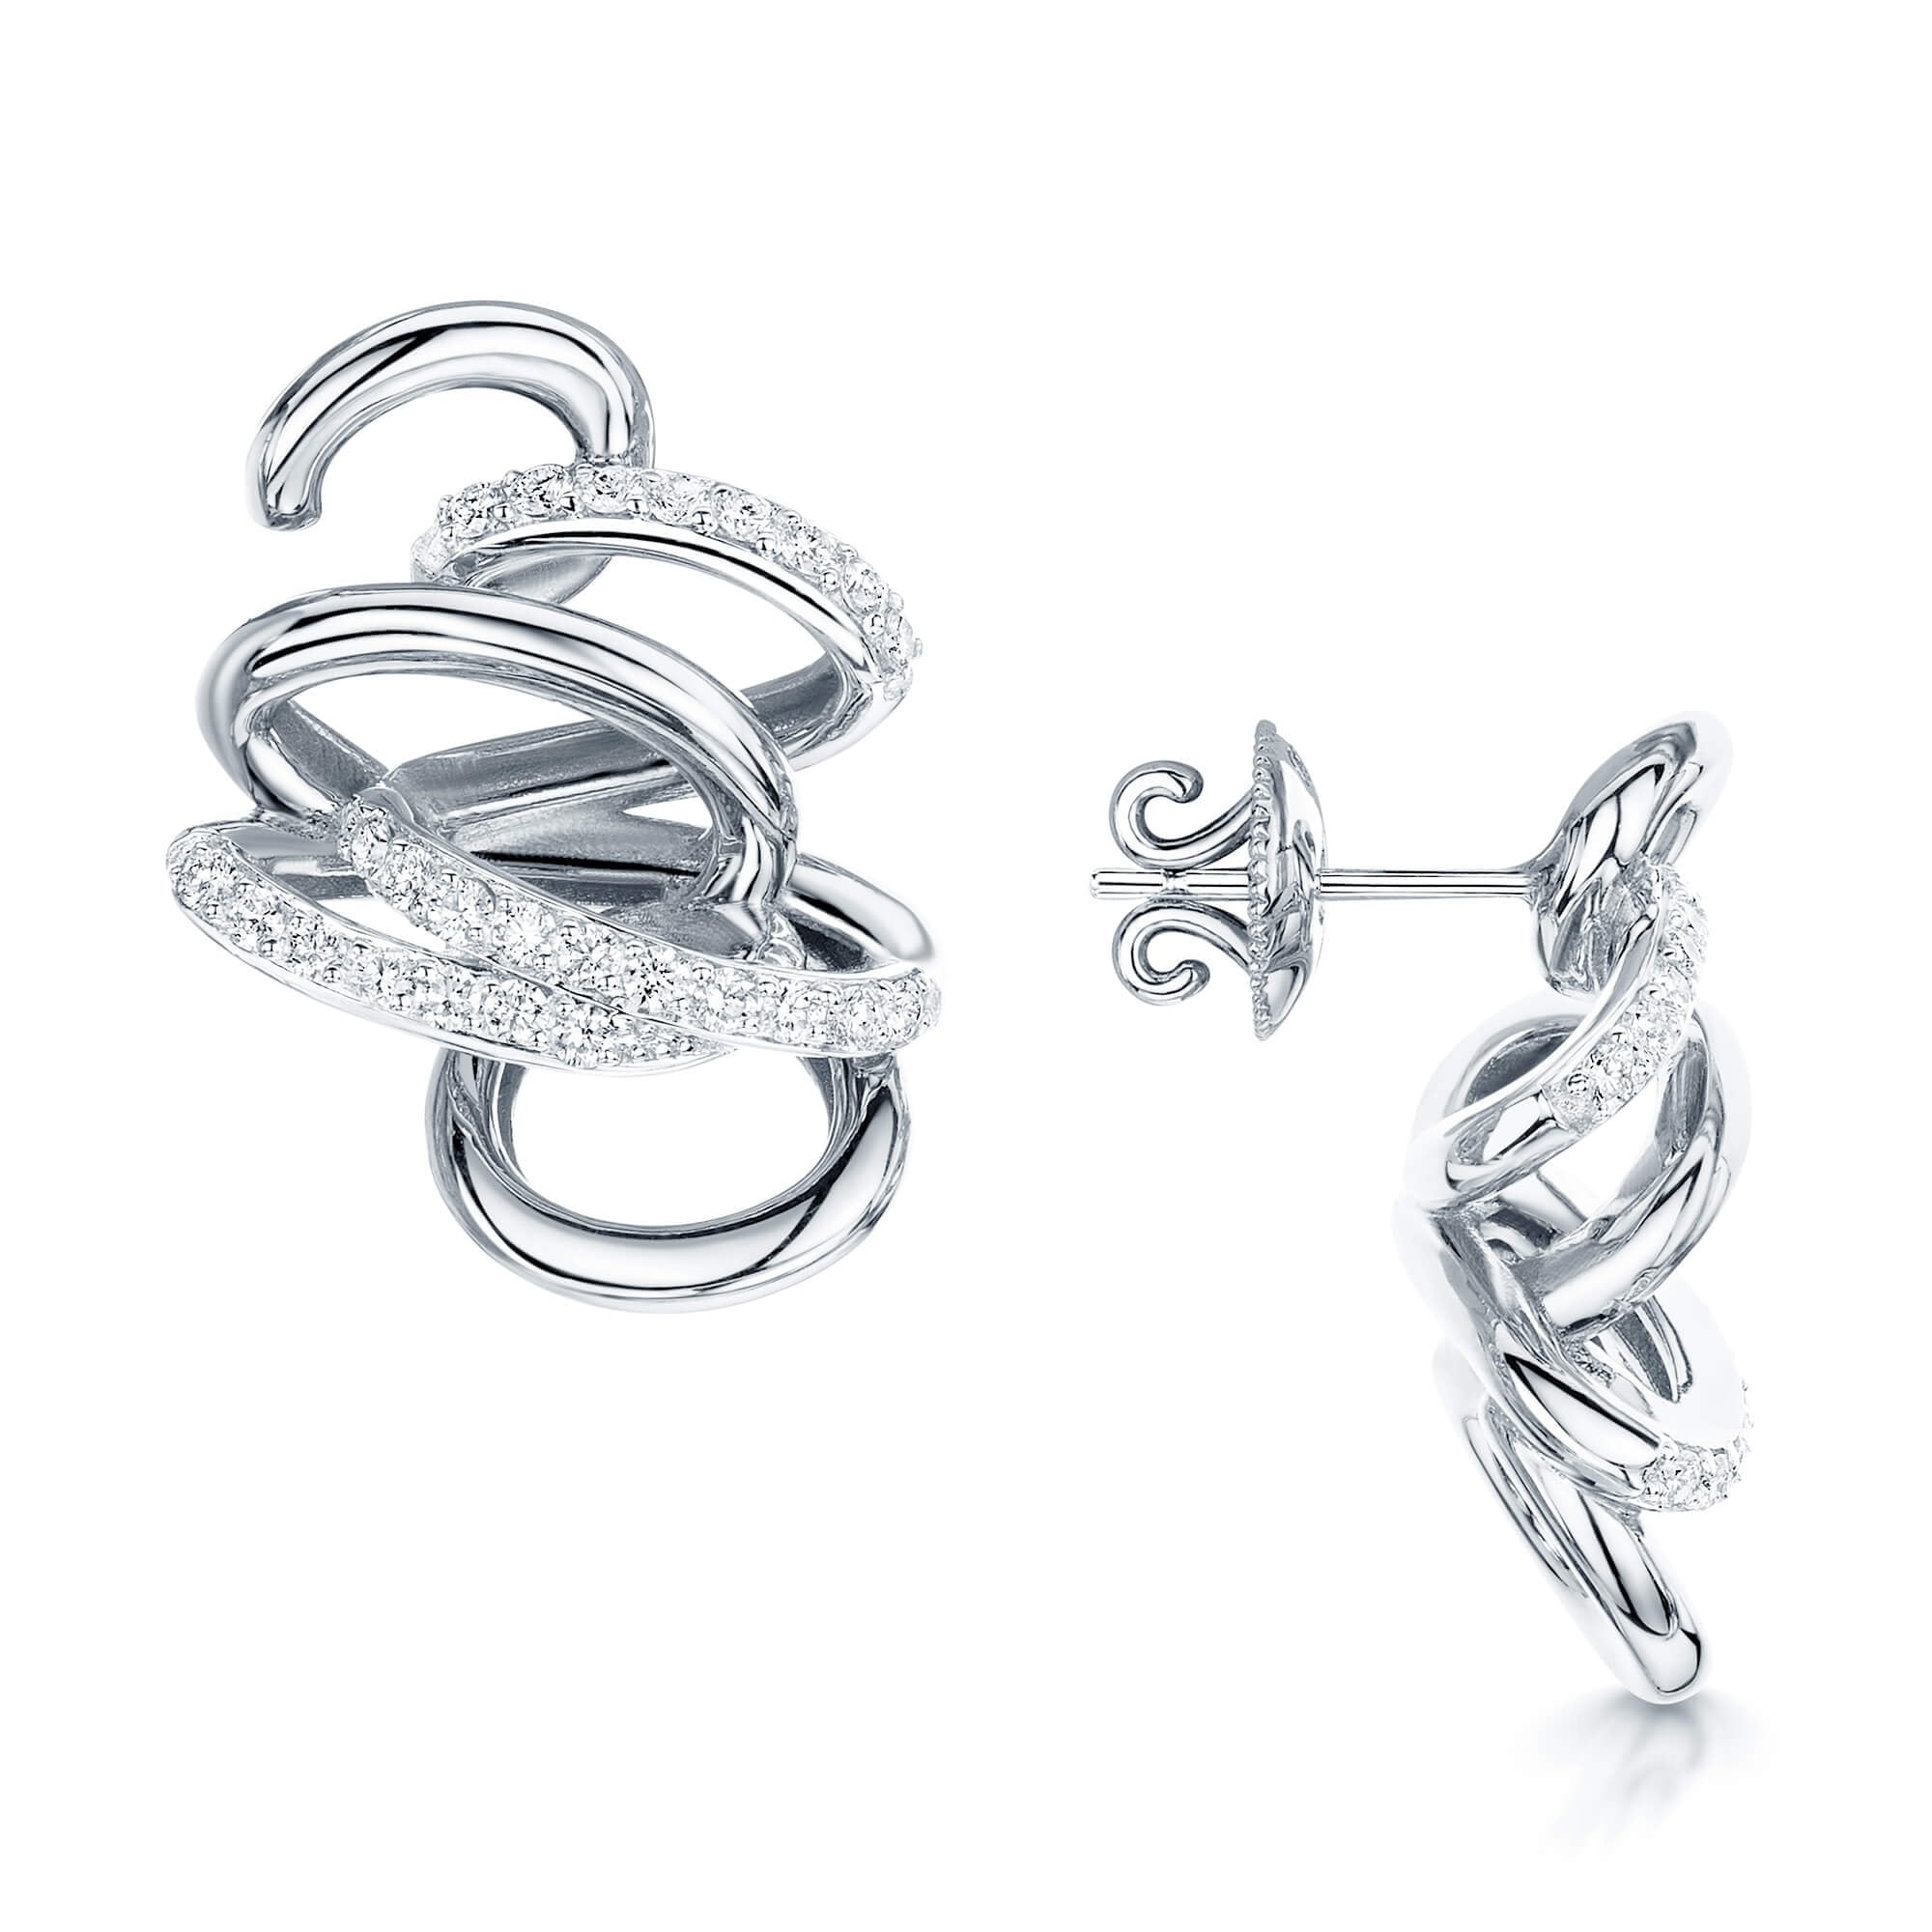 18ct White Gold Diamond Entwined Knot Earrings